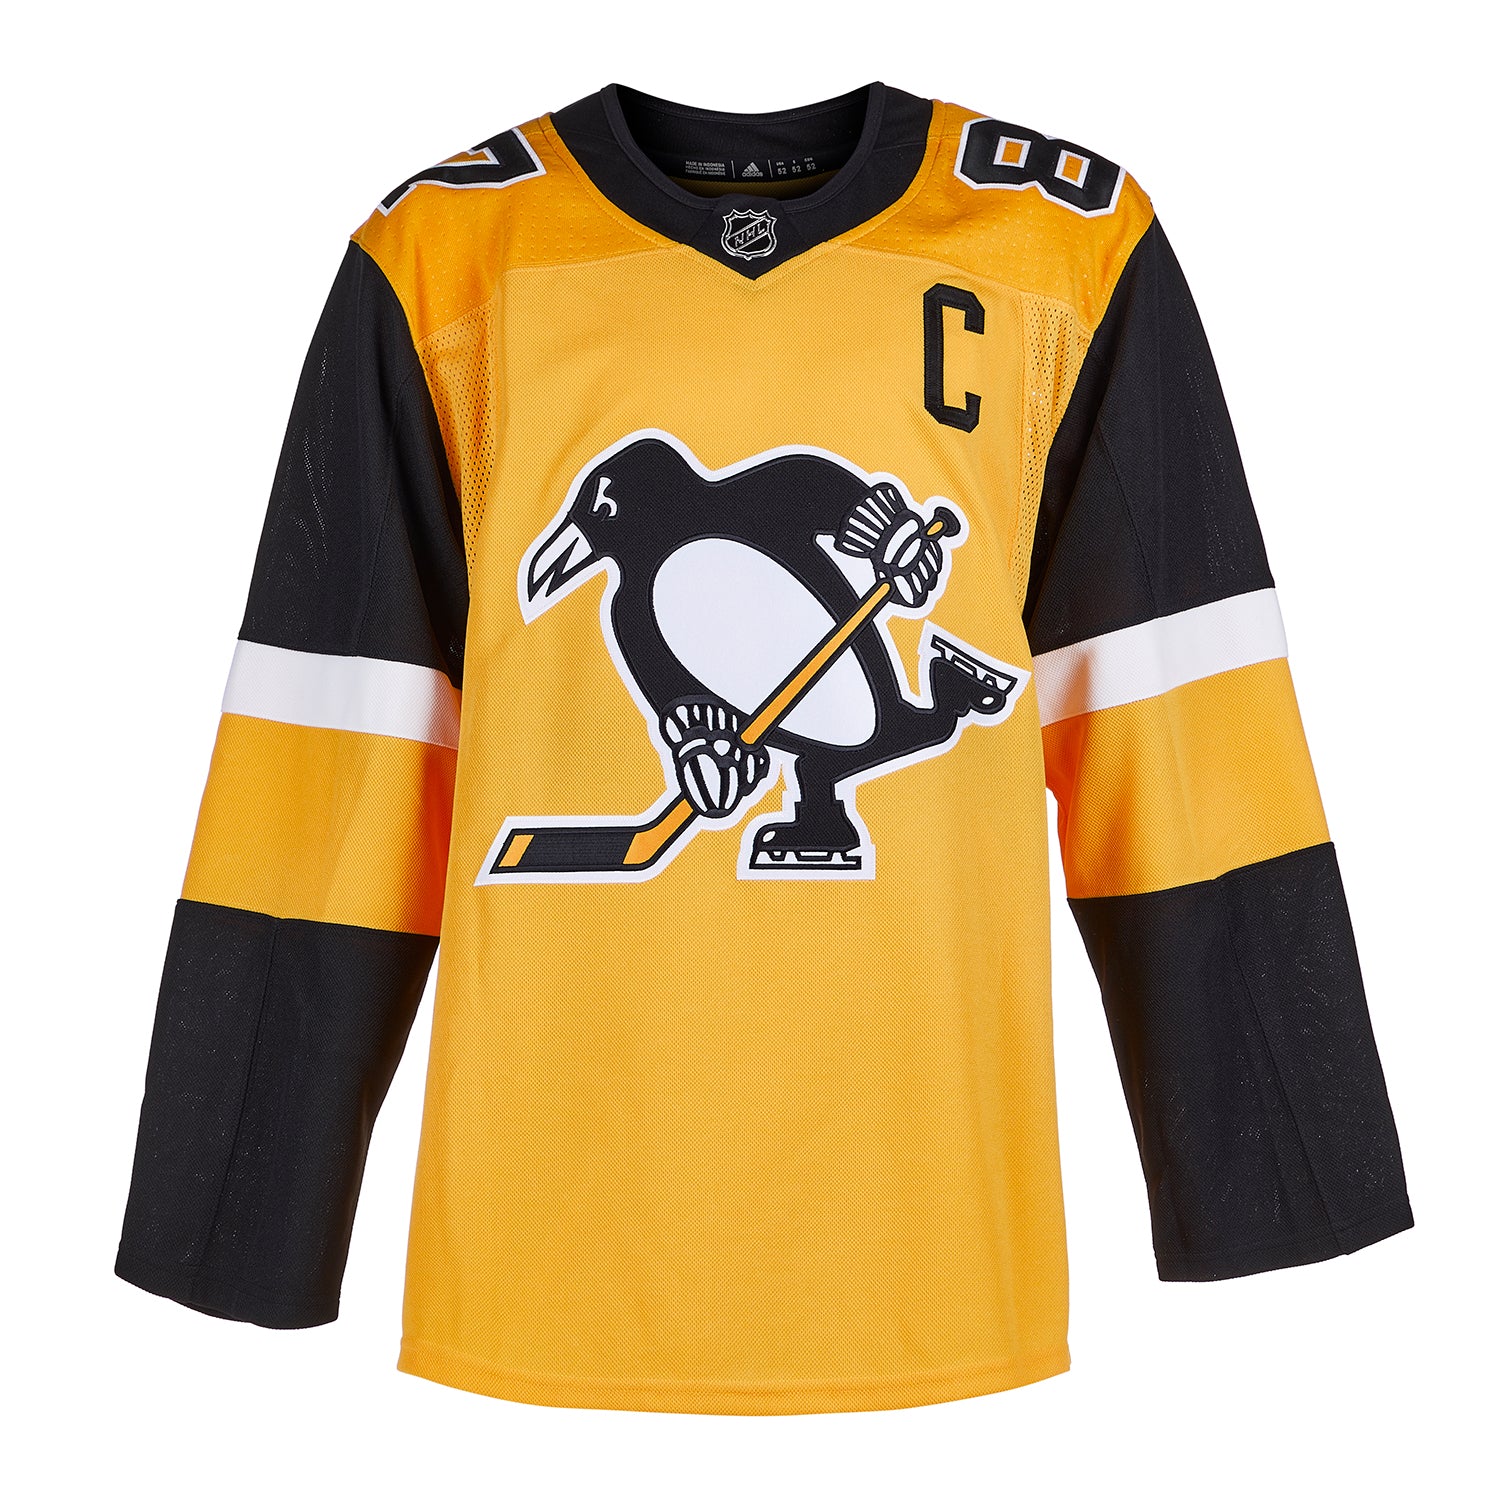 Sidney Crosby - Signed Pittsburgh Penguins Black Jersey - 1000